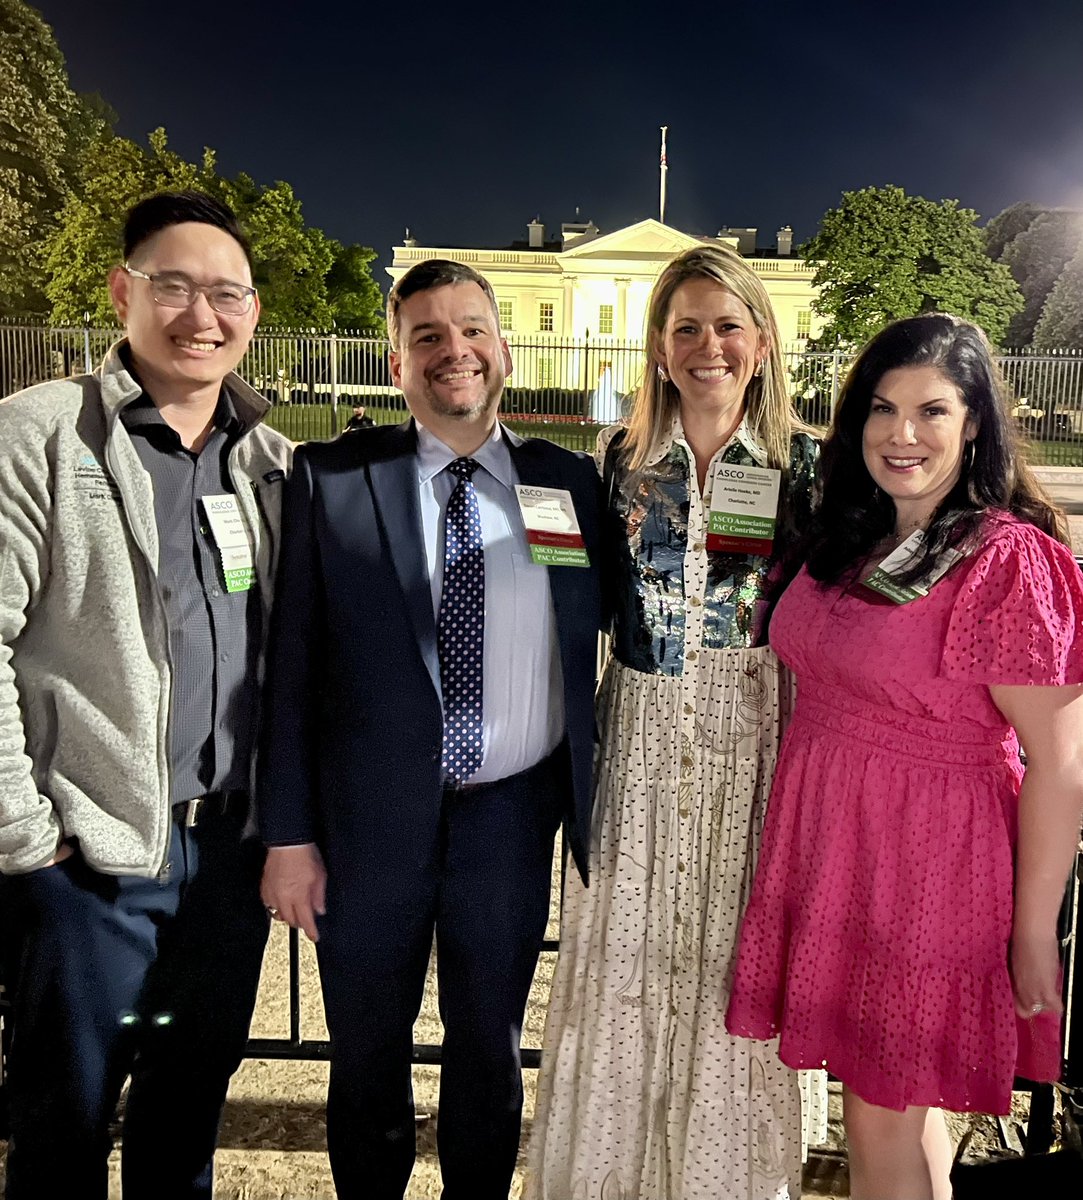 After a long day of prep work w @ASCO , the oncology team from @LevineCancer at @AtriumHealth is ready to tackle the Hill tomorrow. We enjoyed a view of our beautiful @WhiteHouse tonight. 🇺🇸 #nc #ASCOAdvocacySummit